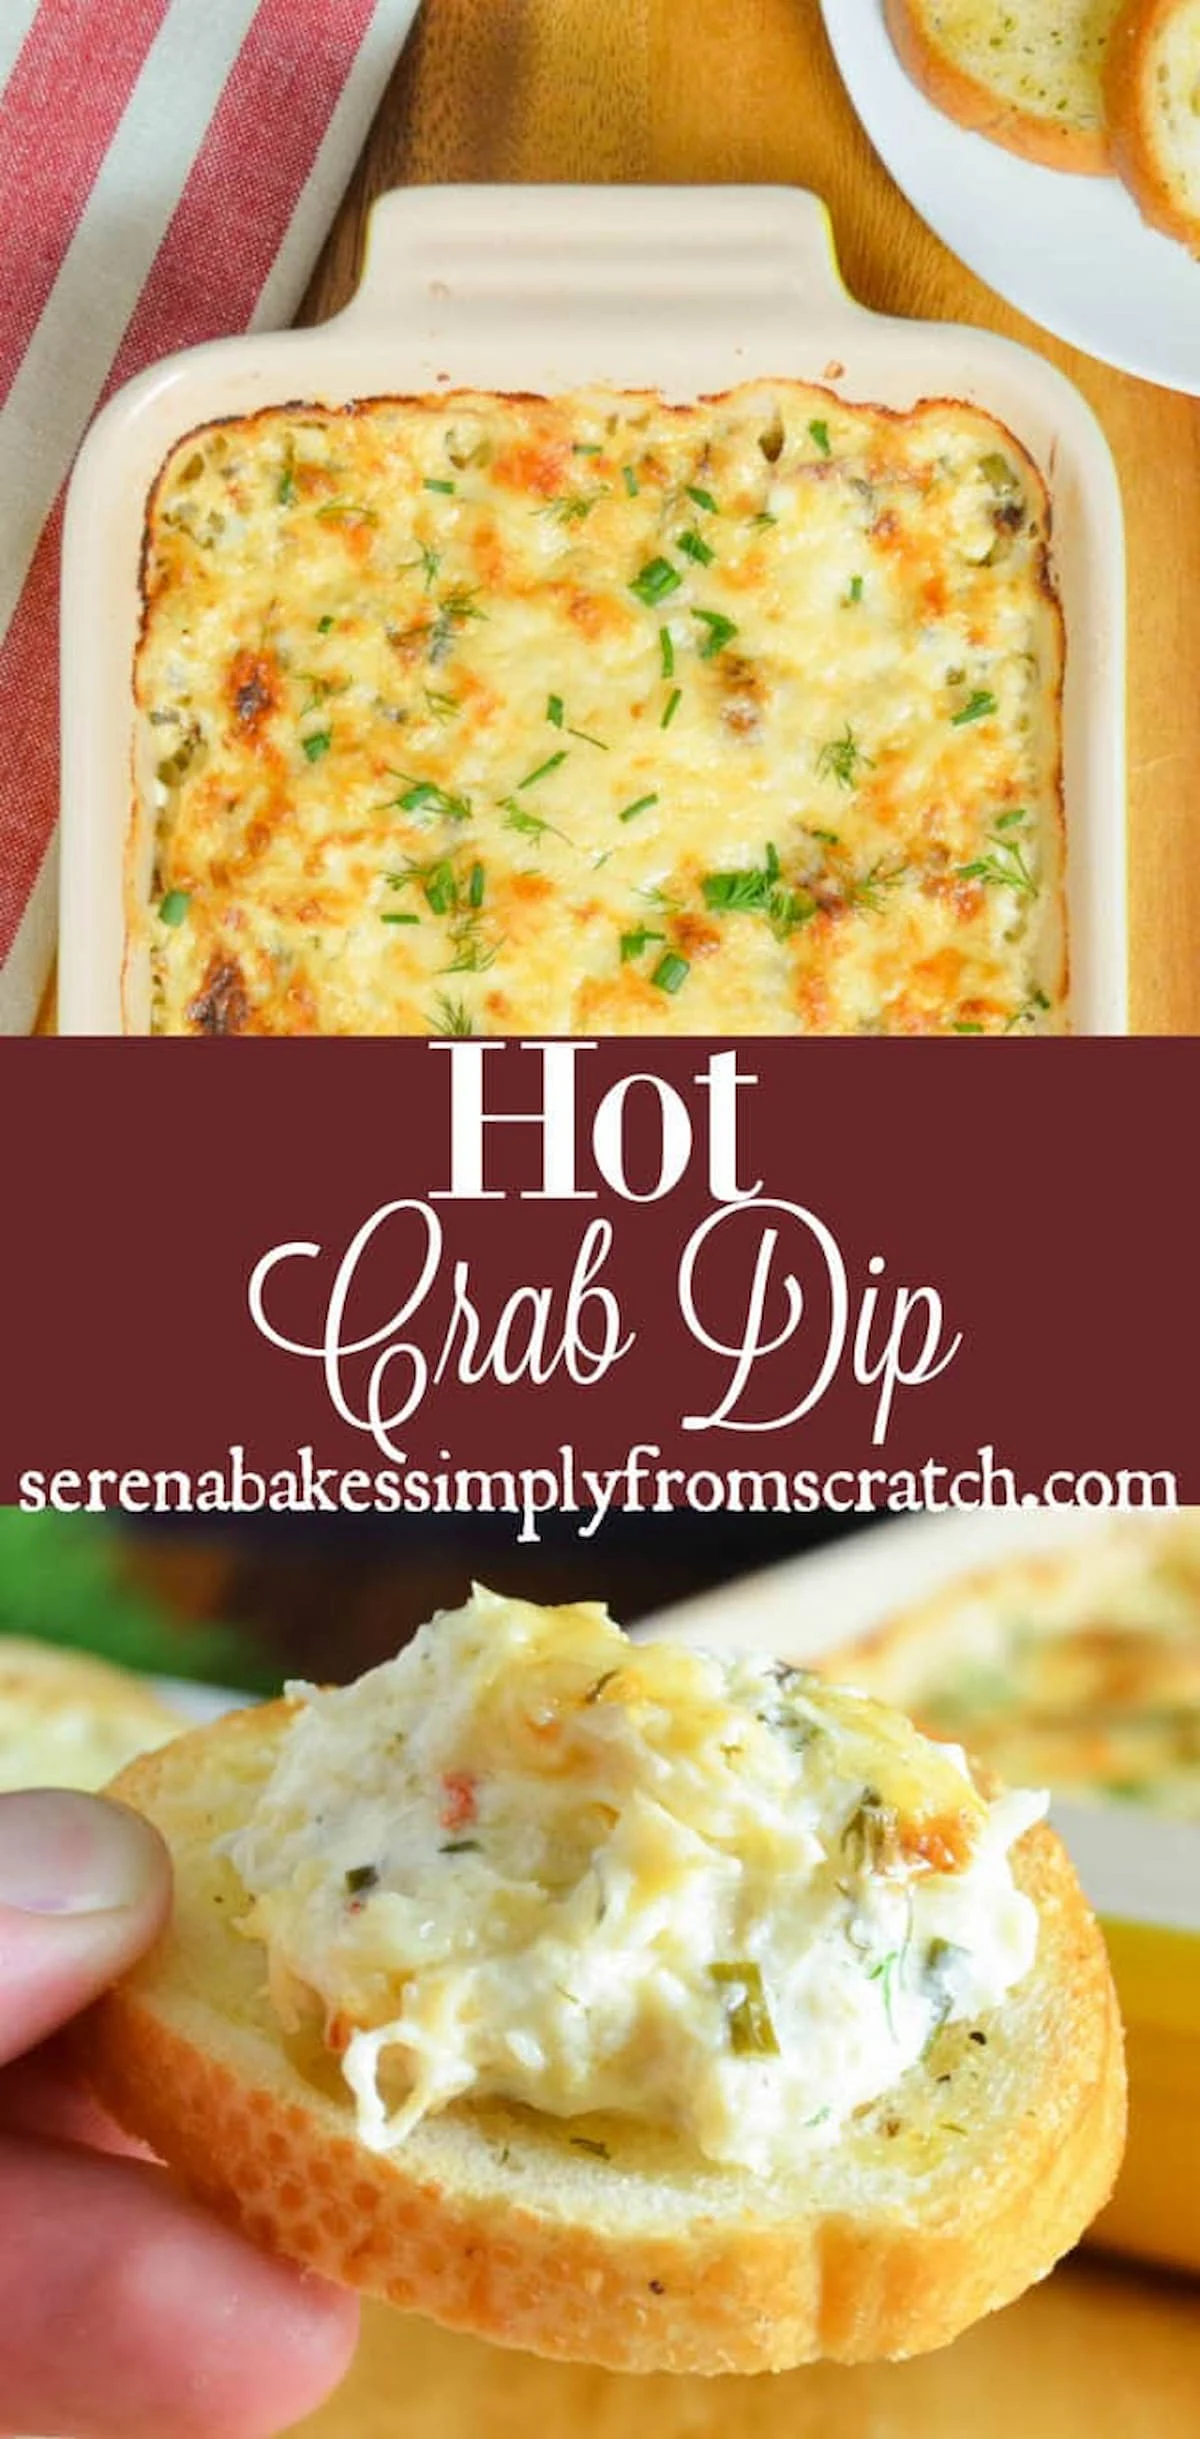 Hot Crab Dip is a favorite party appetizer loaded with lots of Dungeness Crab in a cheesy herb base recipe from Serena Bakes Simply From Scratch.